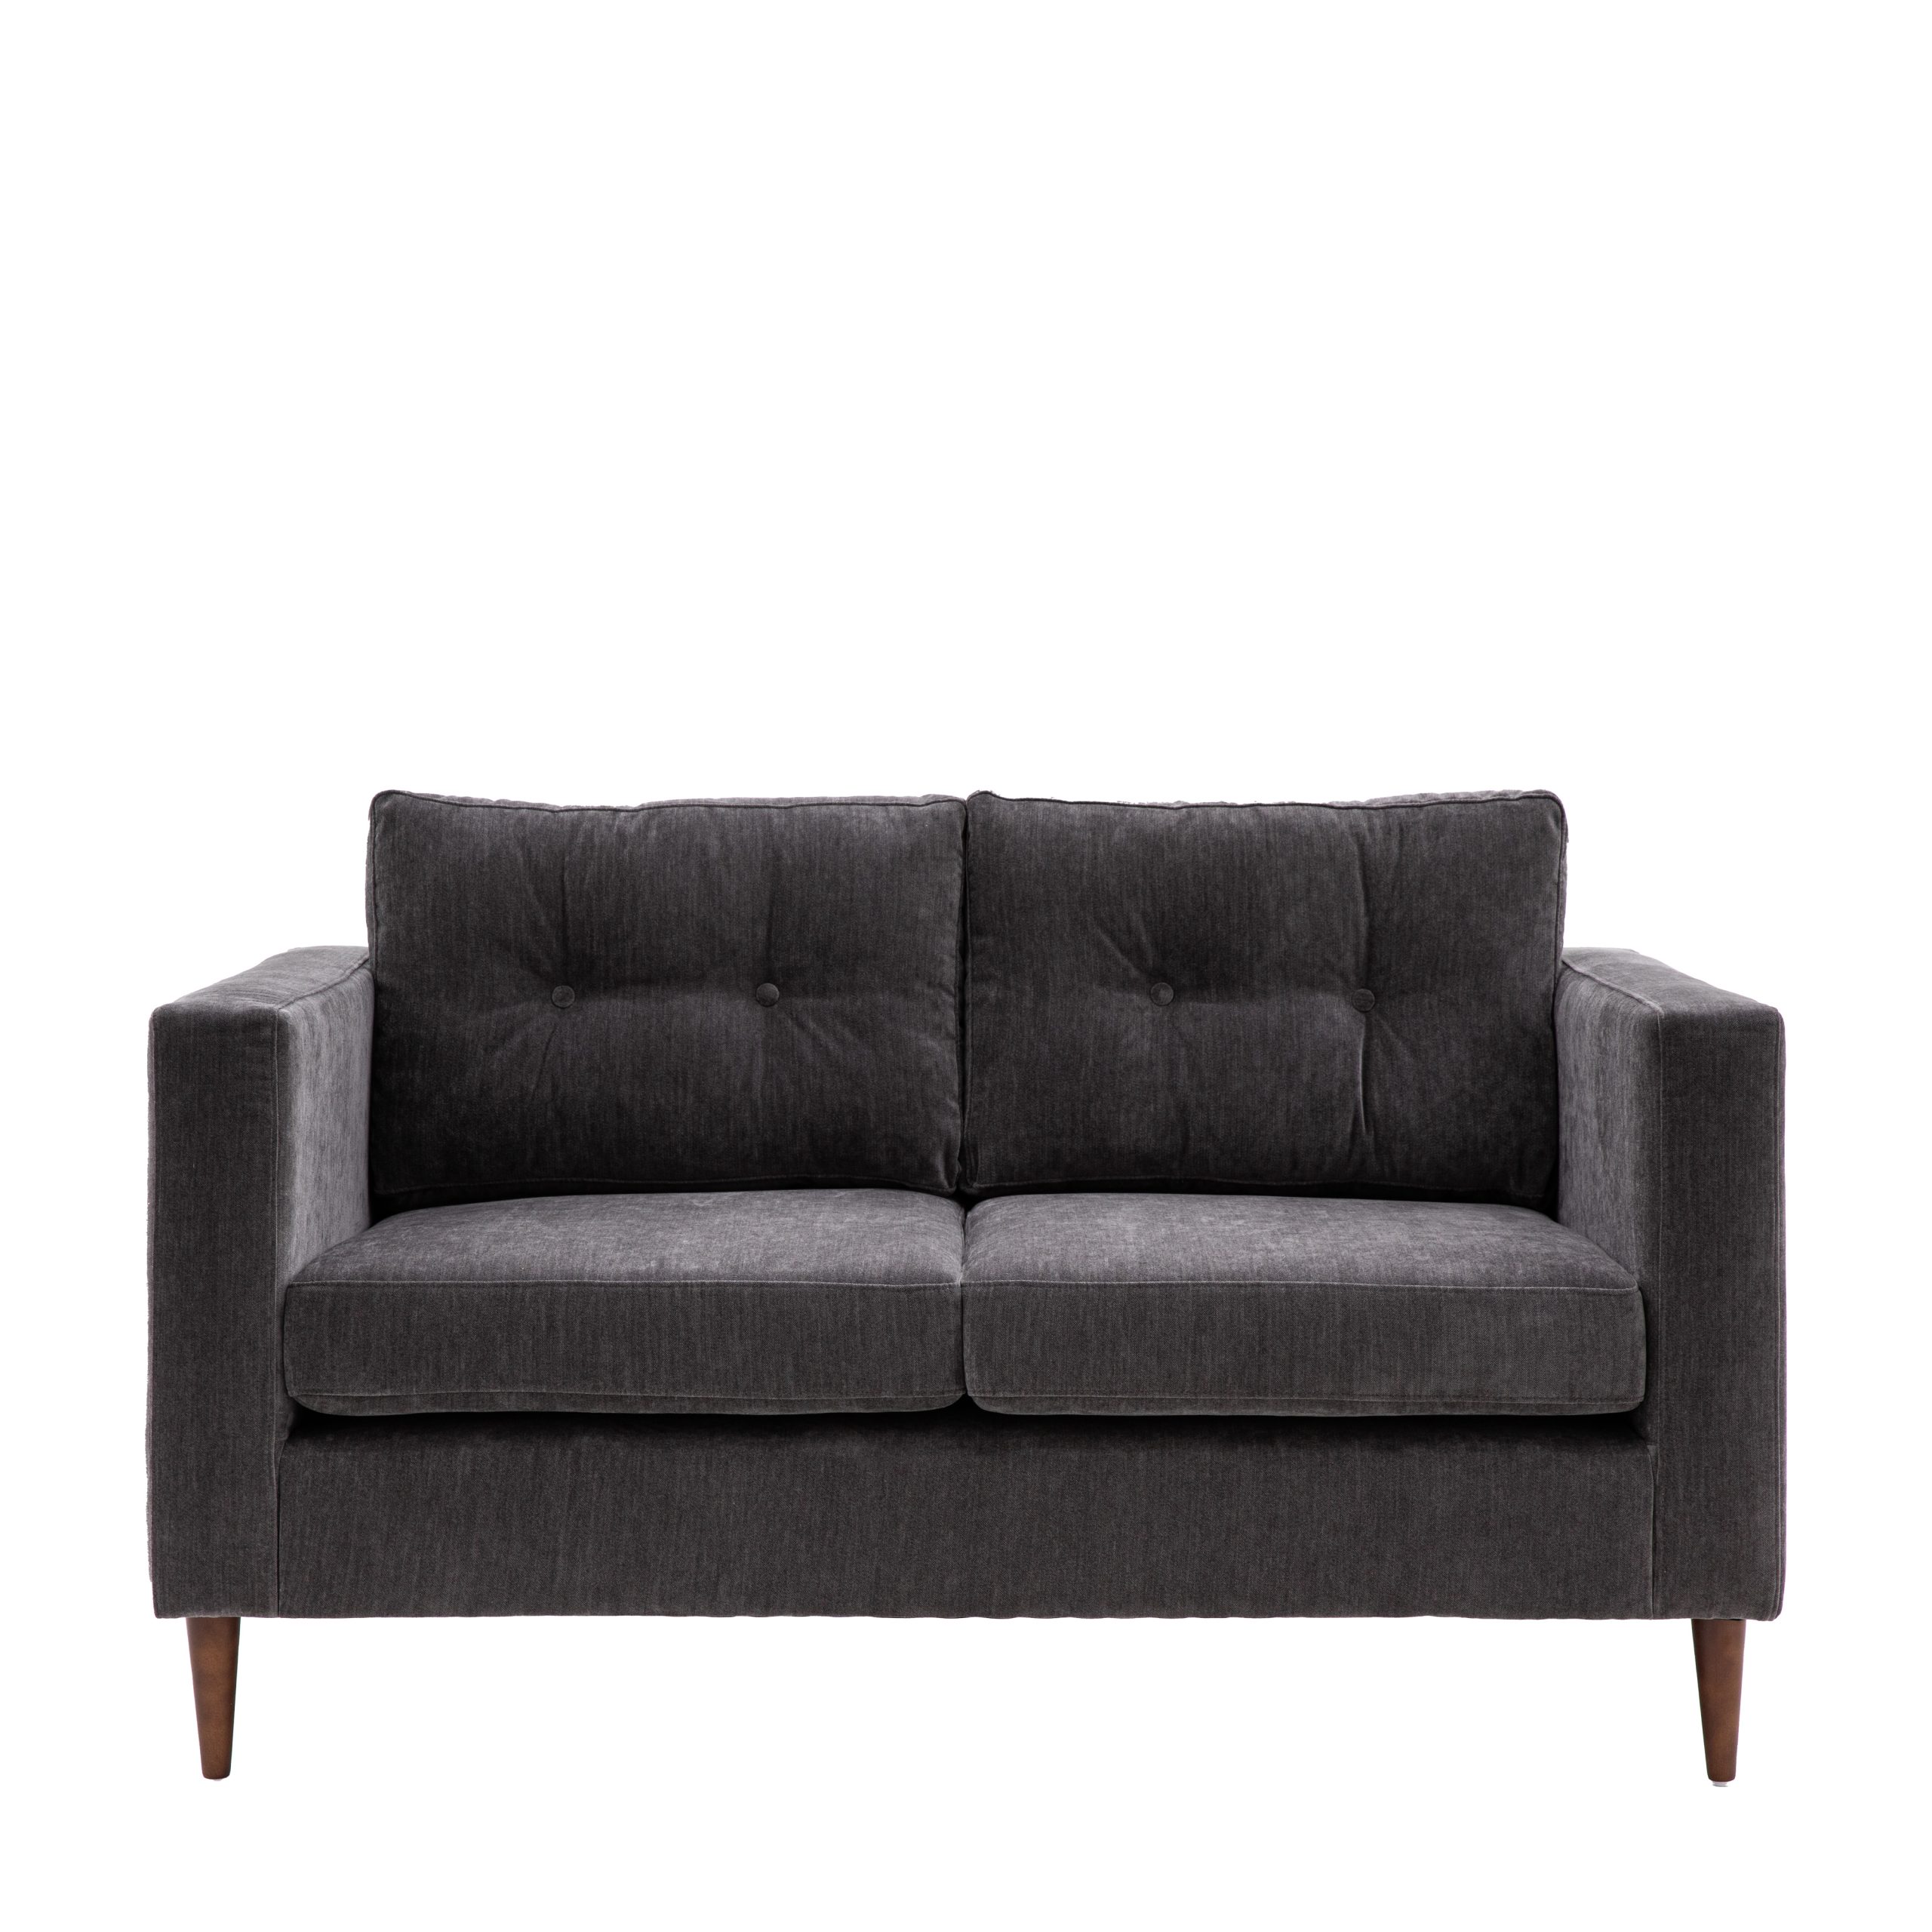 Gallery Direct Whitwell Sofa 2 Seater Charcoal